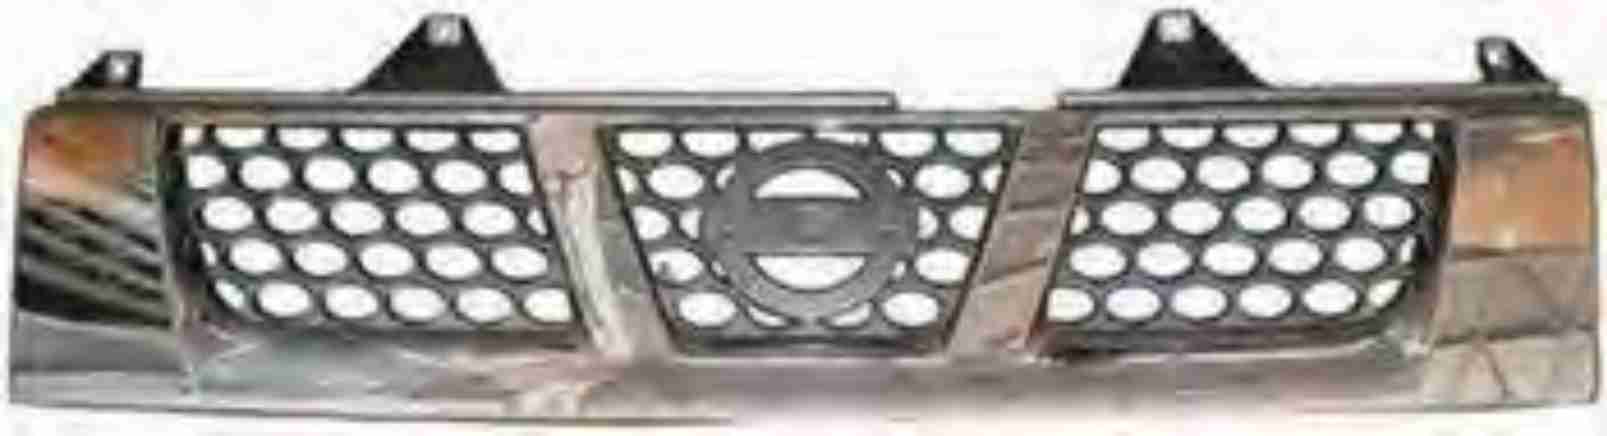 GRI502138 - 2005759 - FRONTIER 01-05 GRILLE CHROME & GREY